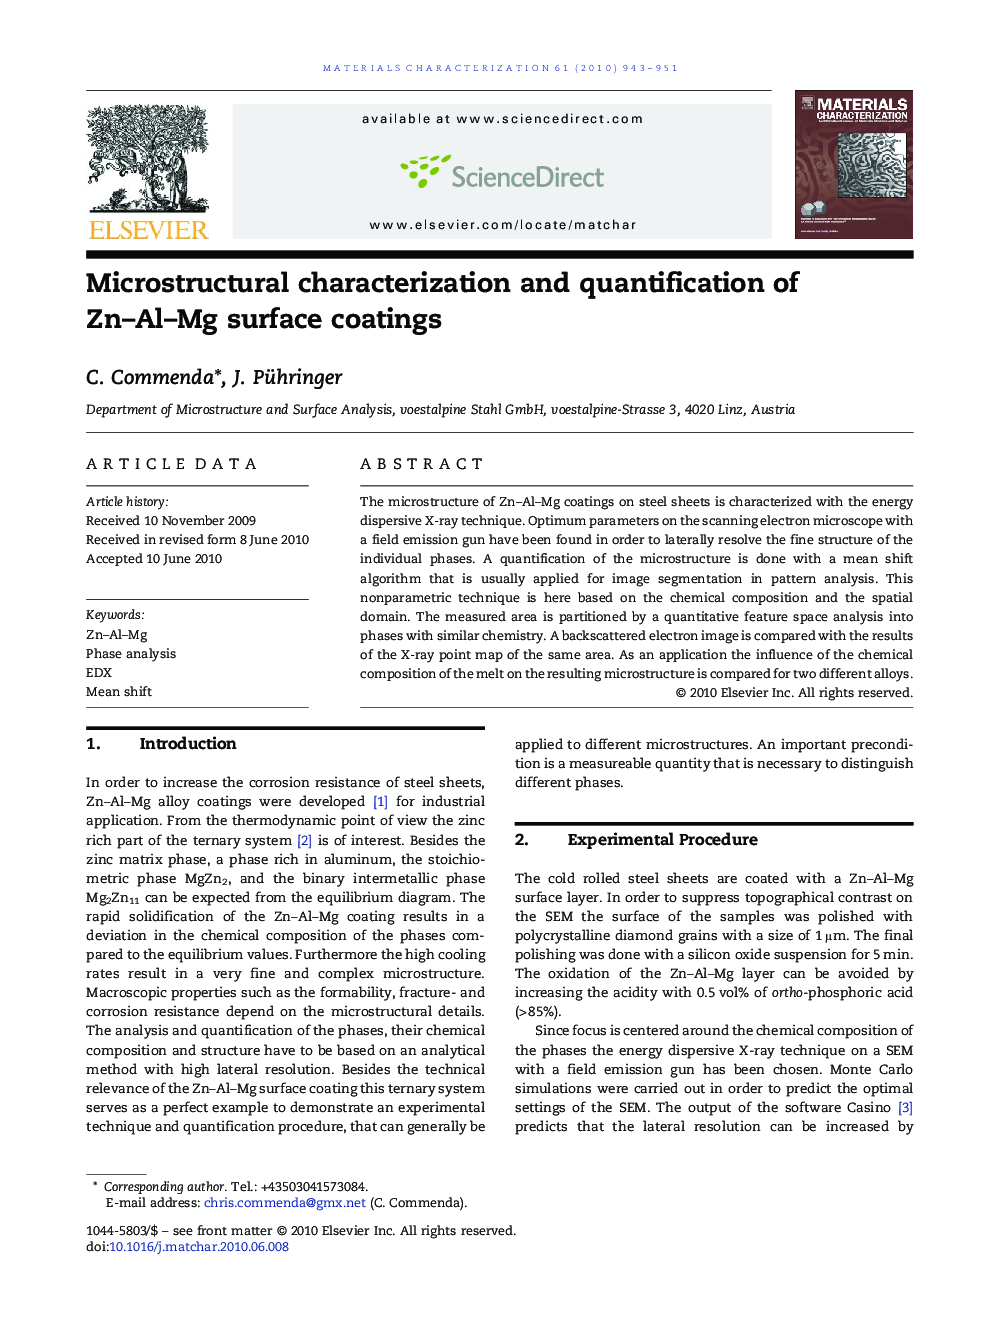 Microstructural characterization and quantification of Zn–Al–Mg surface coatings